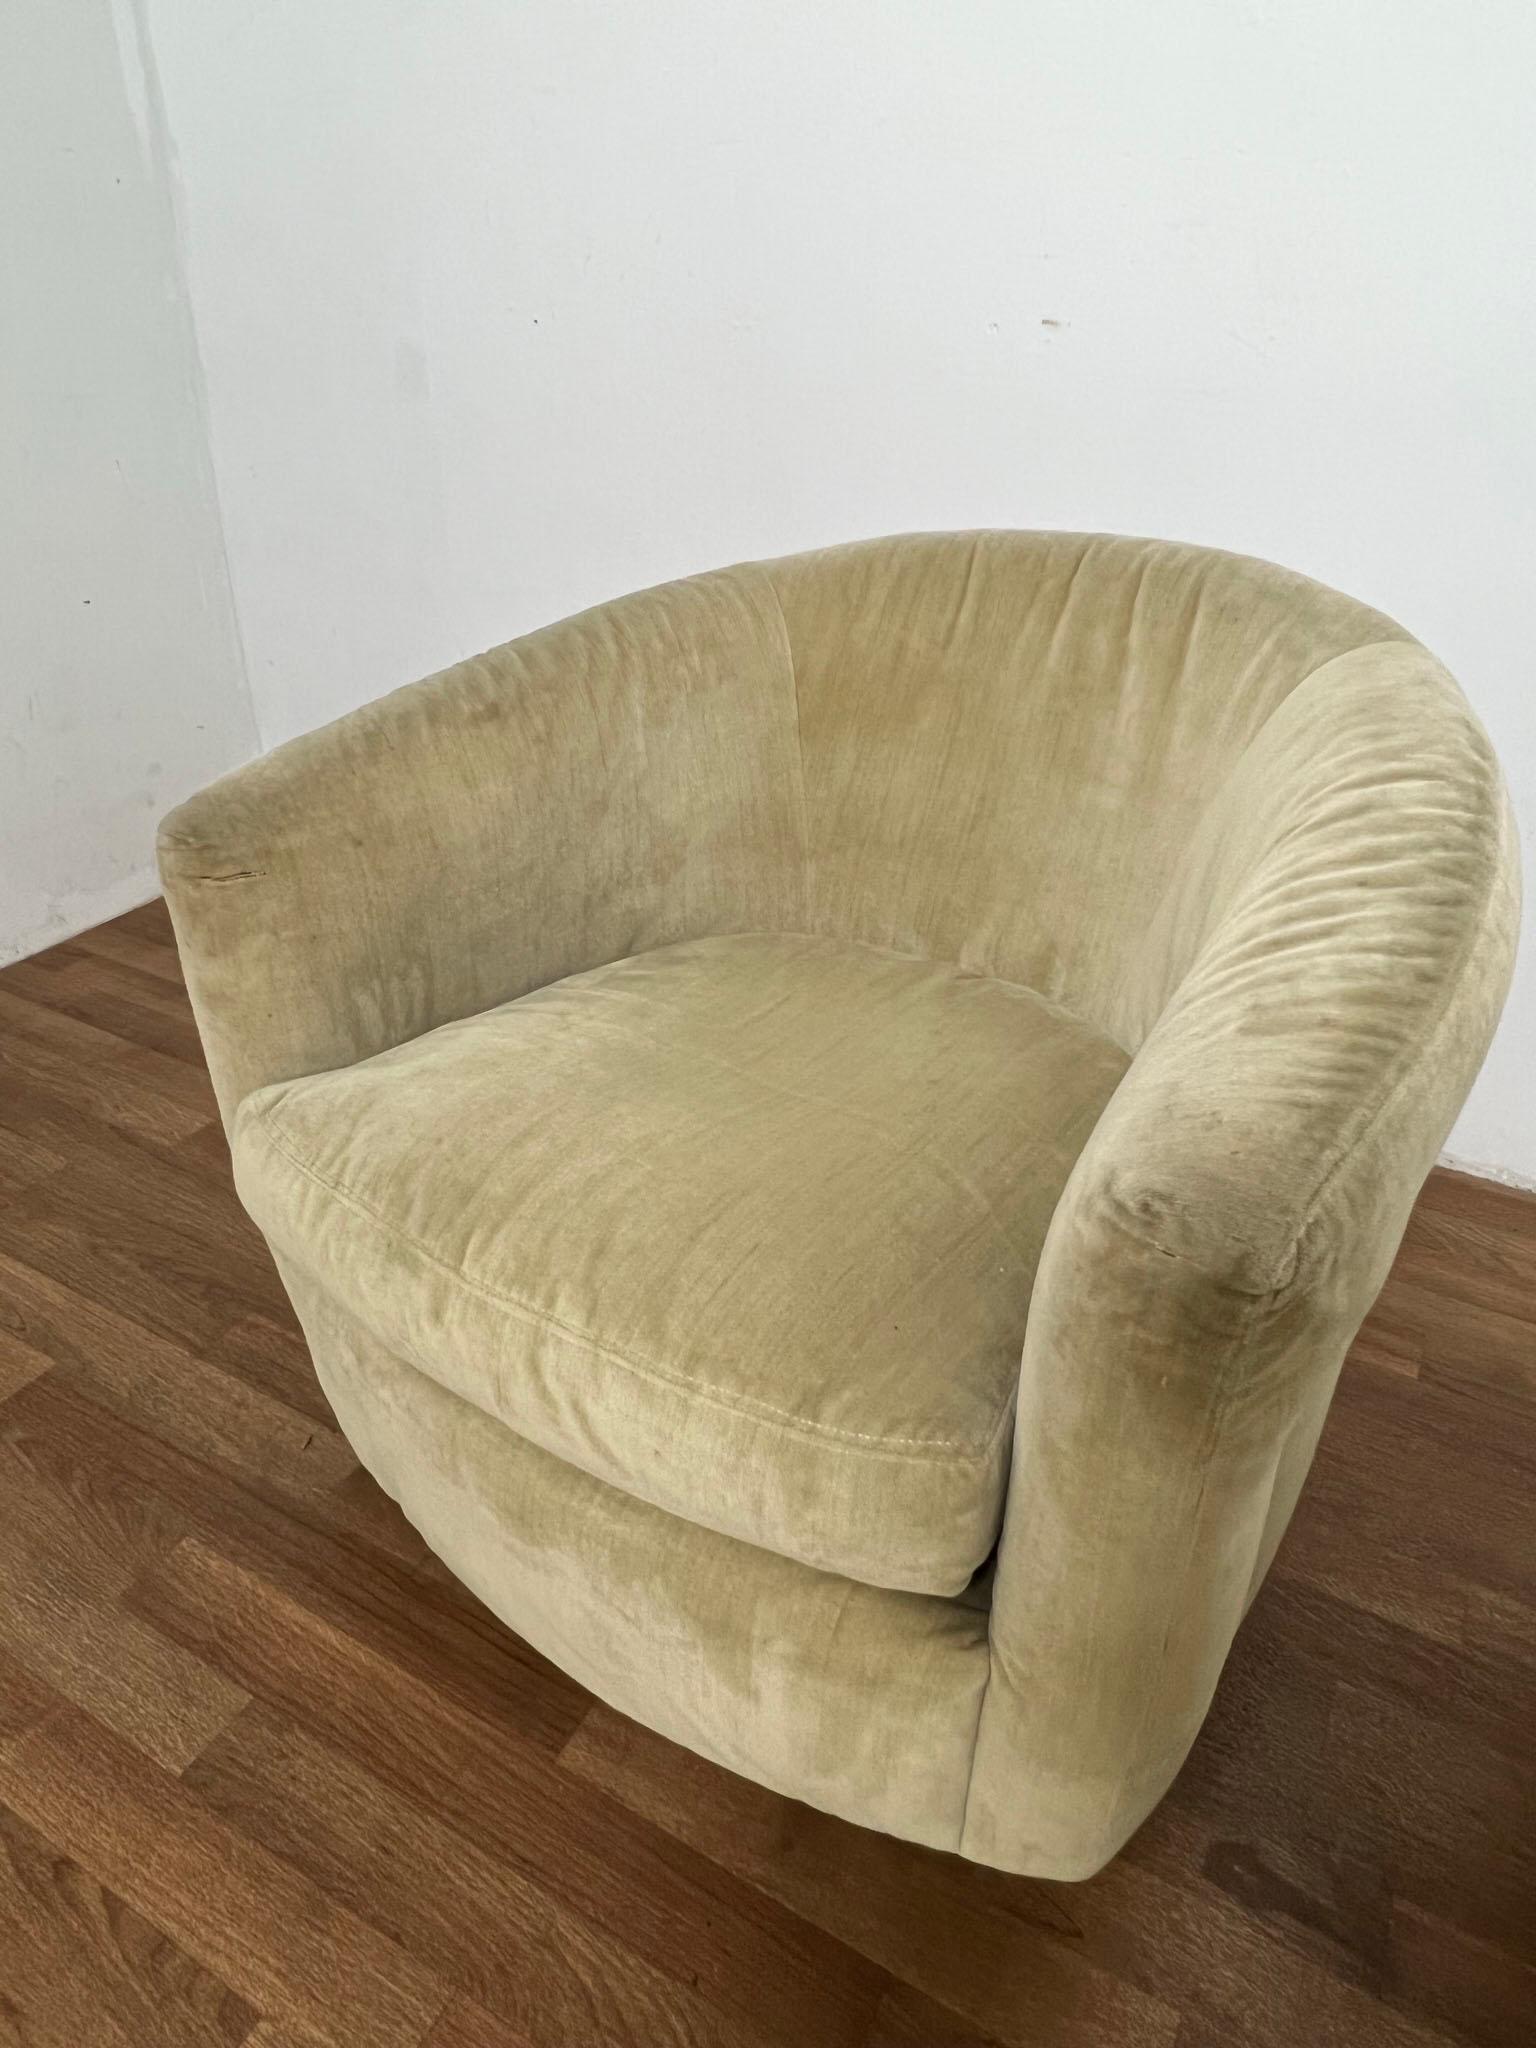 Upholstery Pair of Milo Baughman for Thayer Coggin Swivel Tub Chairs Ca. 1970s For Sale